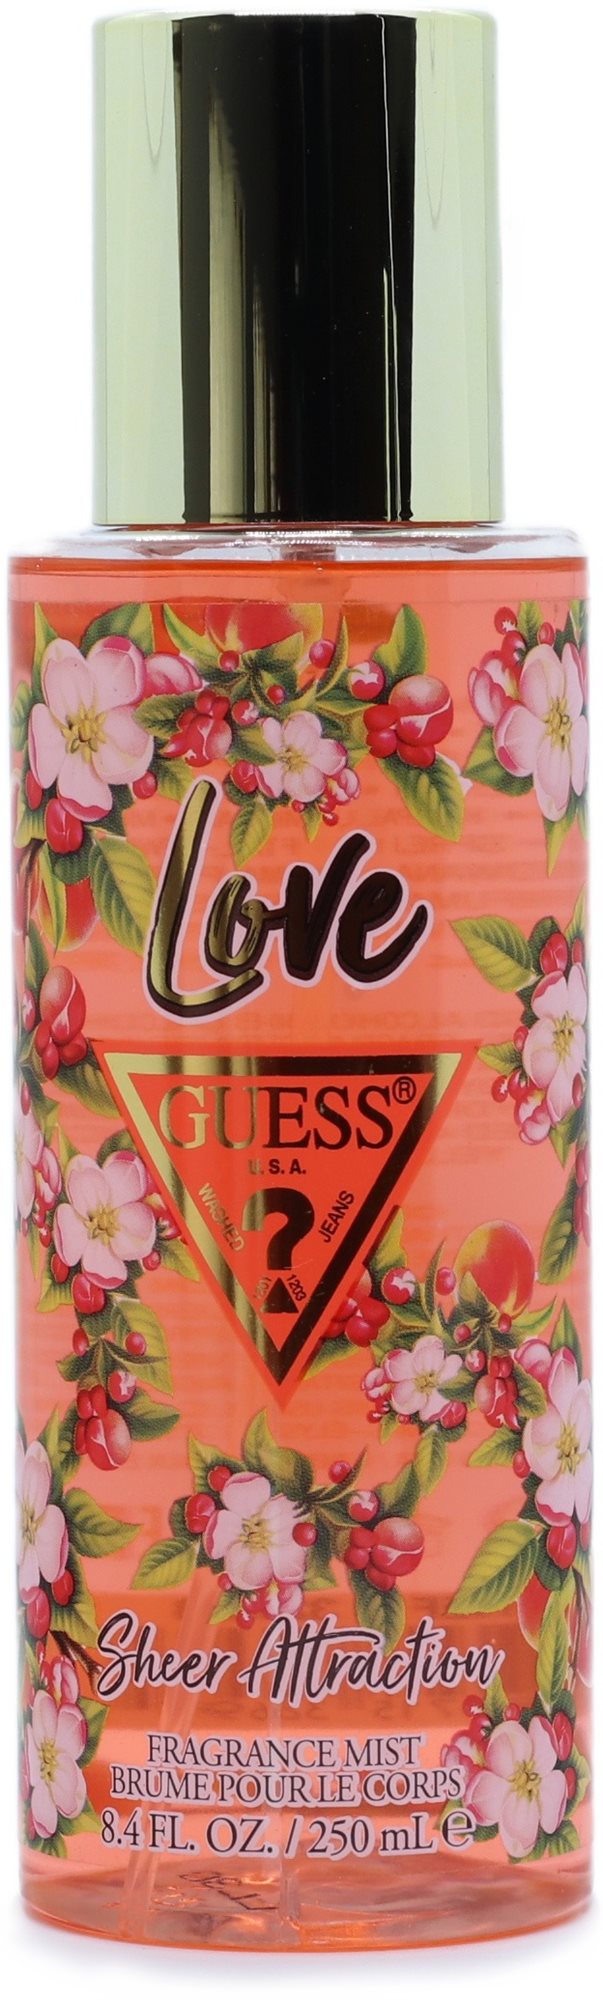 GUESS Love Sheer Attraction 250 ml